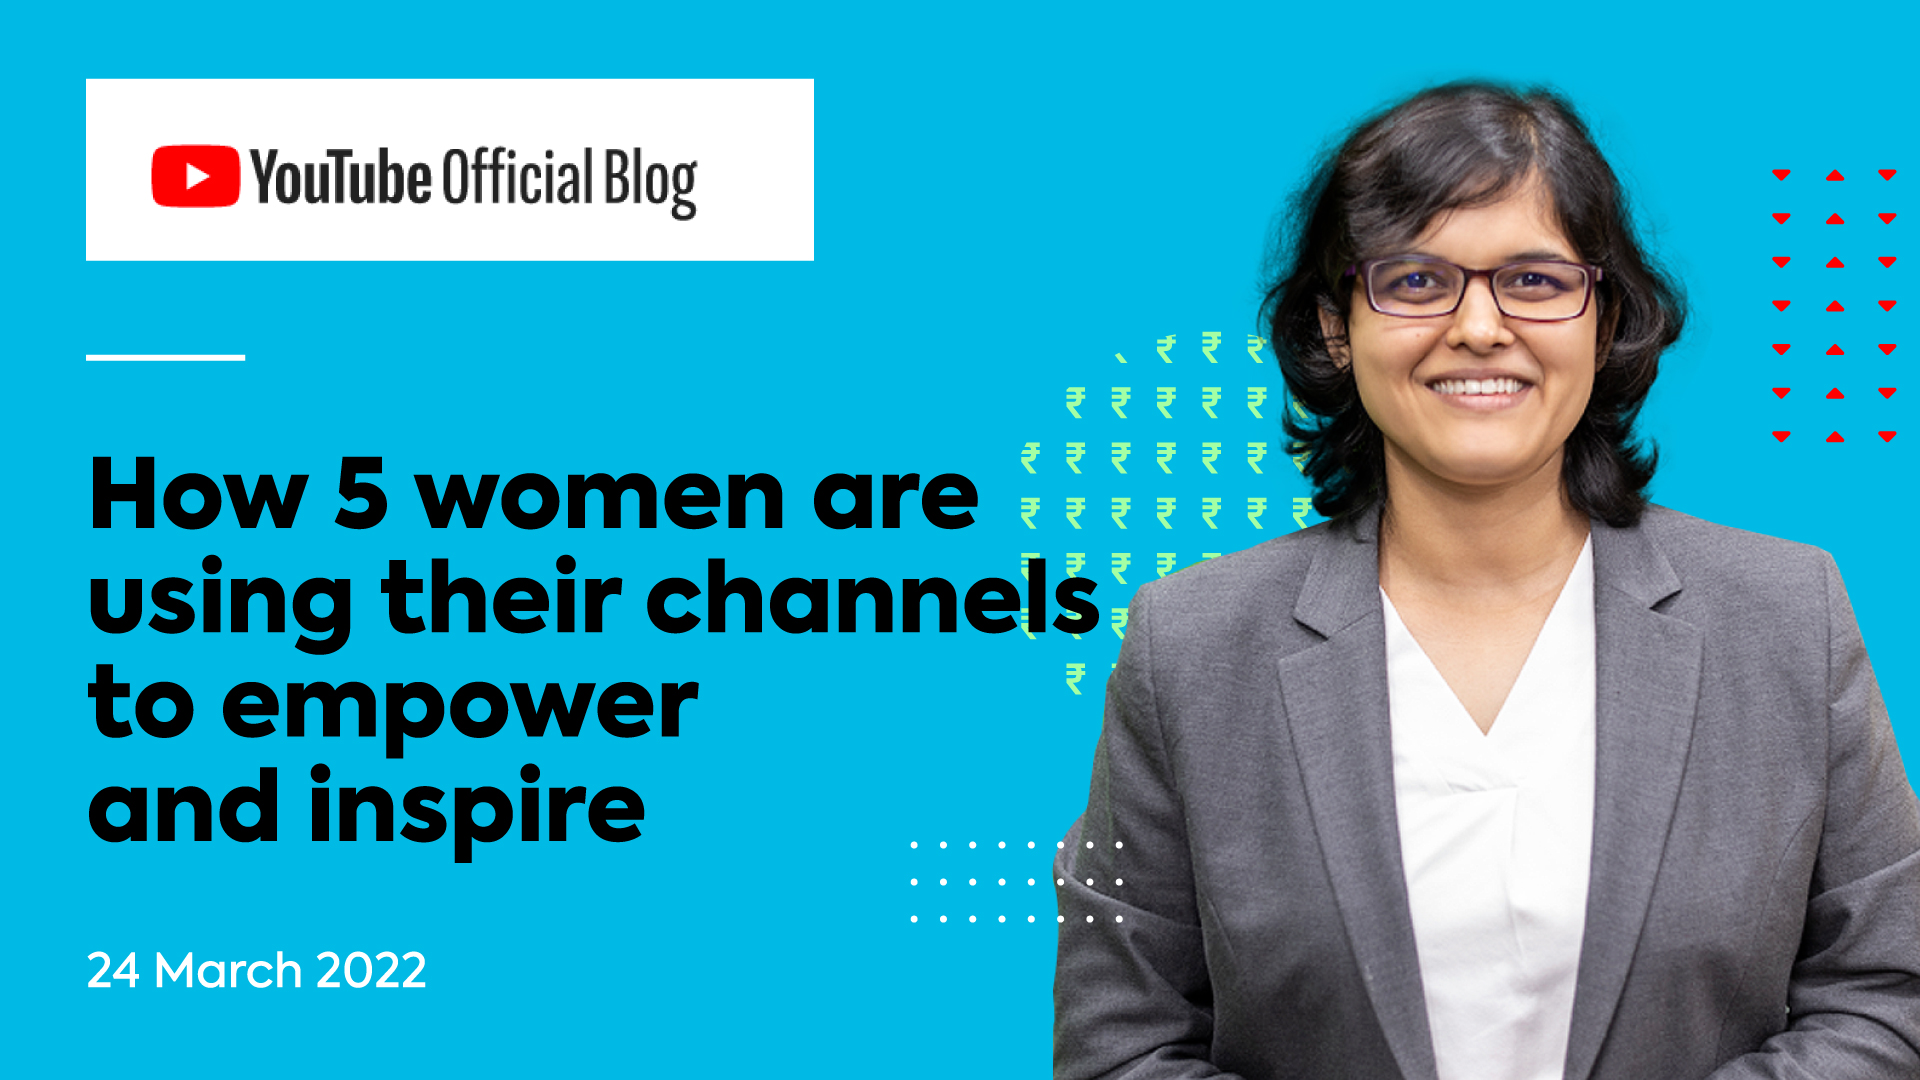 How 5 women are using their channels to empower and inspire